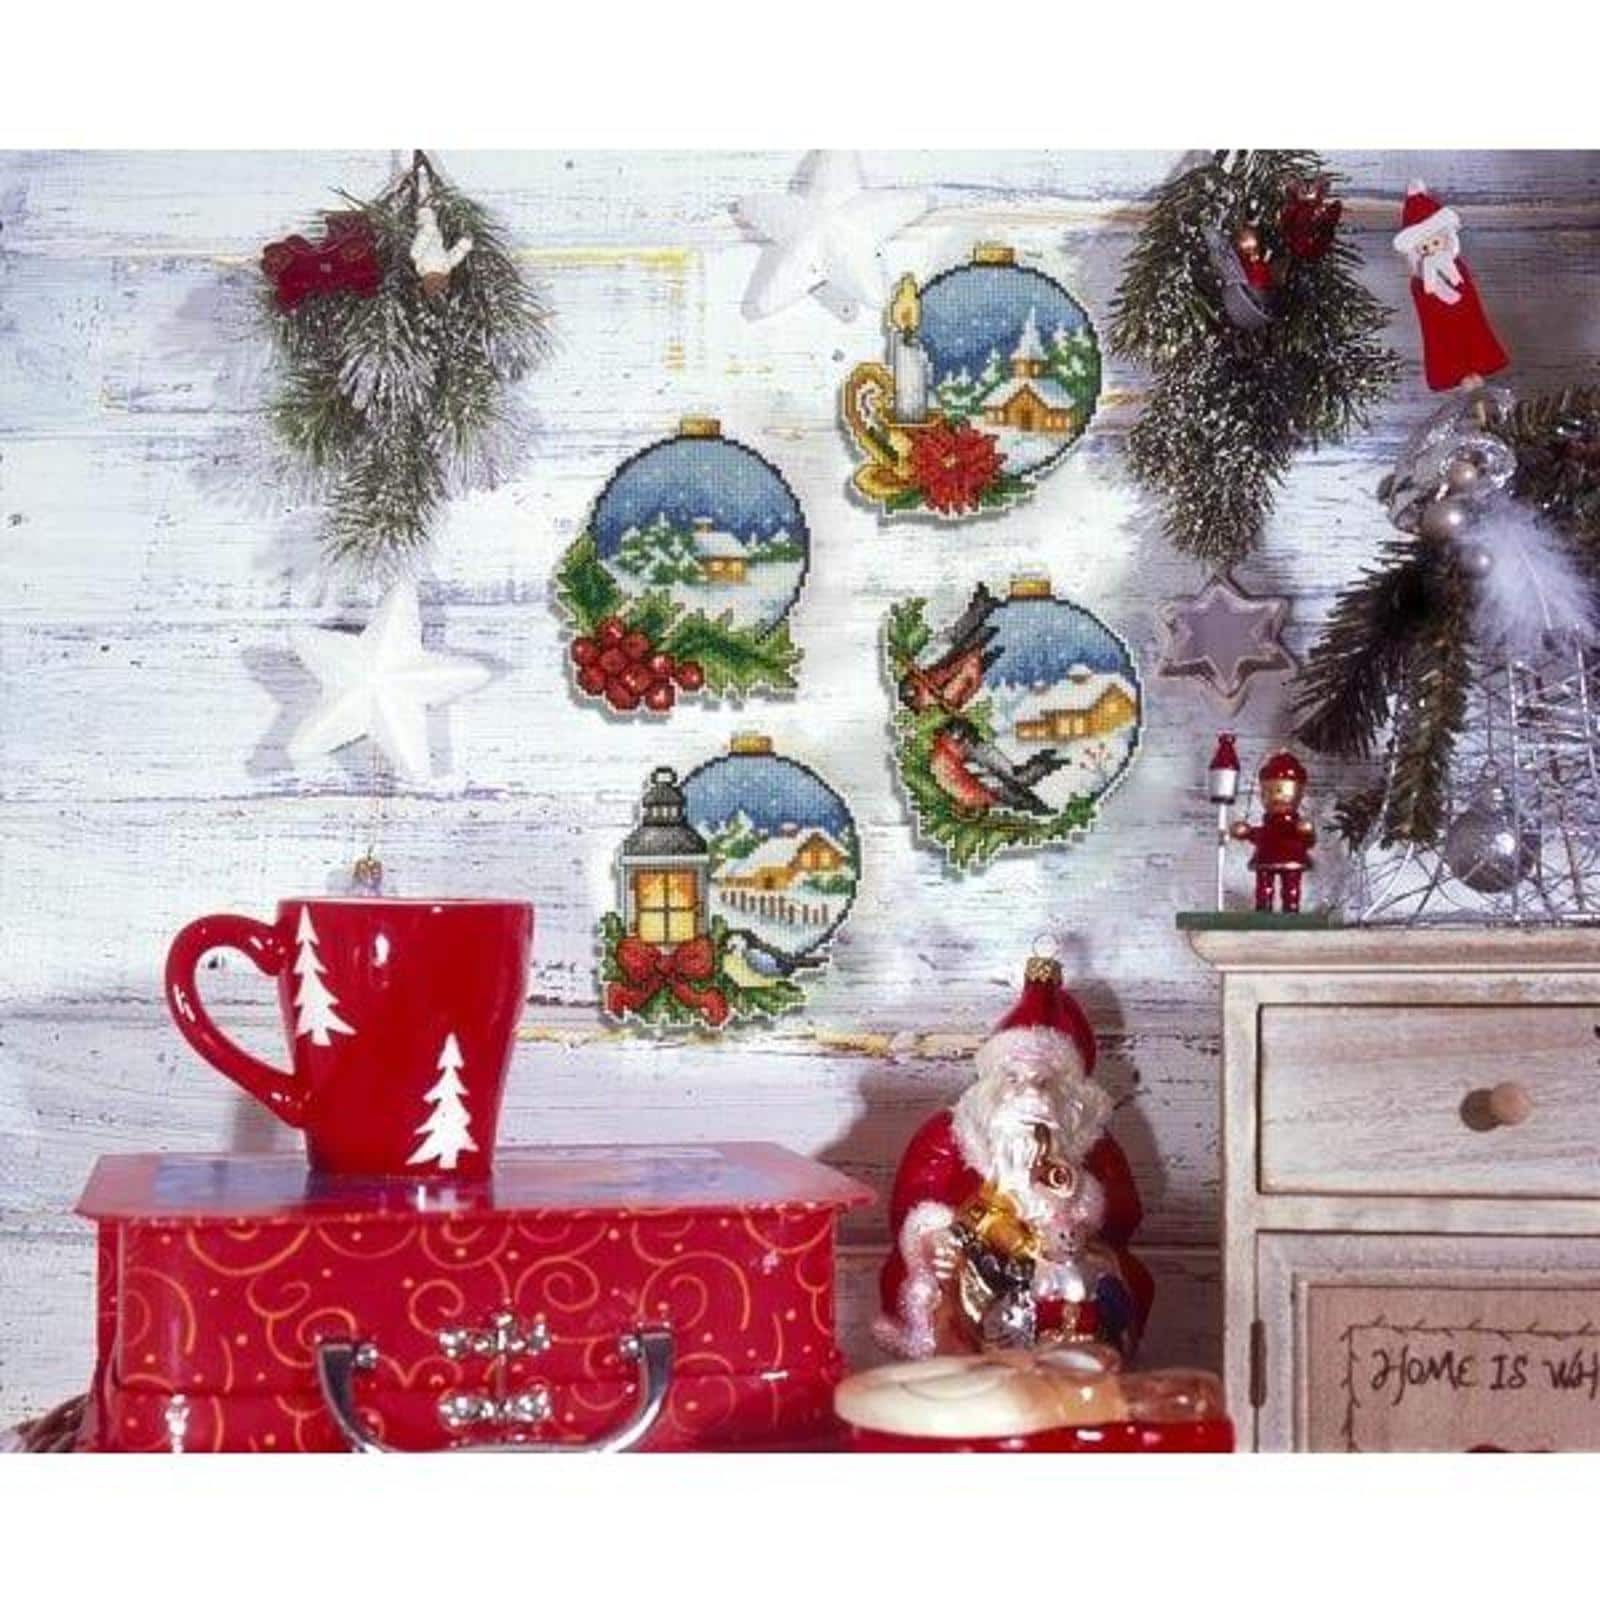 Orchidea Plastic Canvas Counted Cross Stitch Kit With Plastic Canvas Christmas Balls Set of 4 Designs